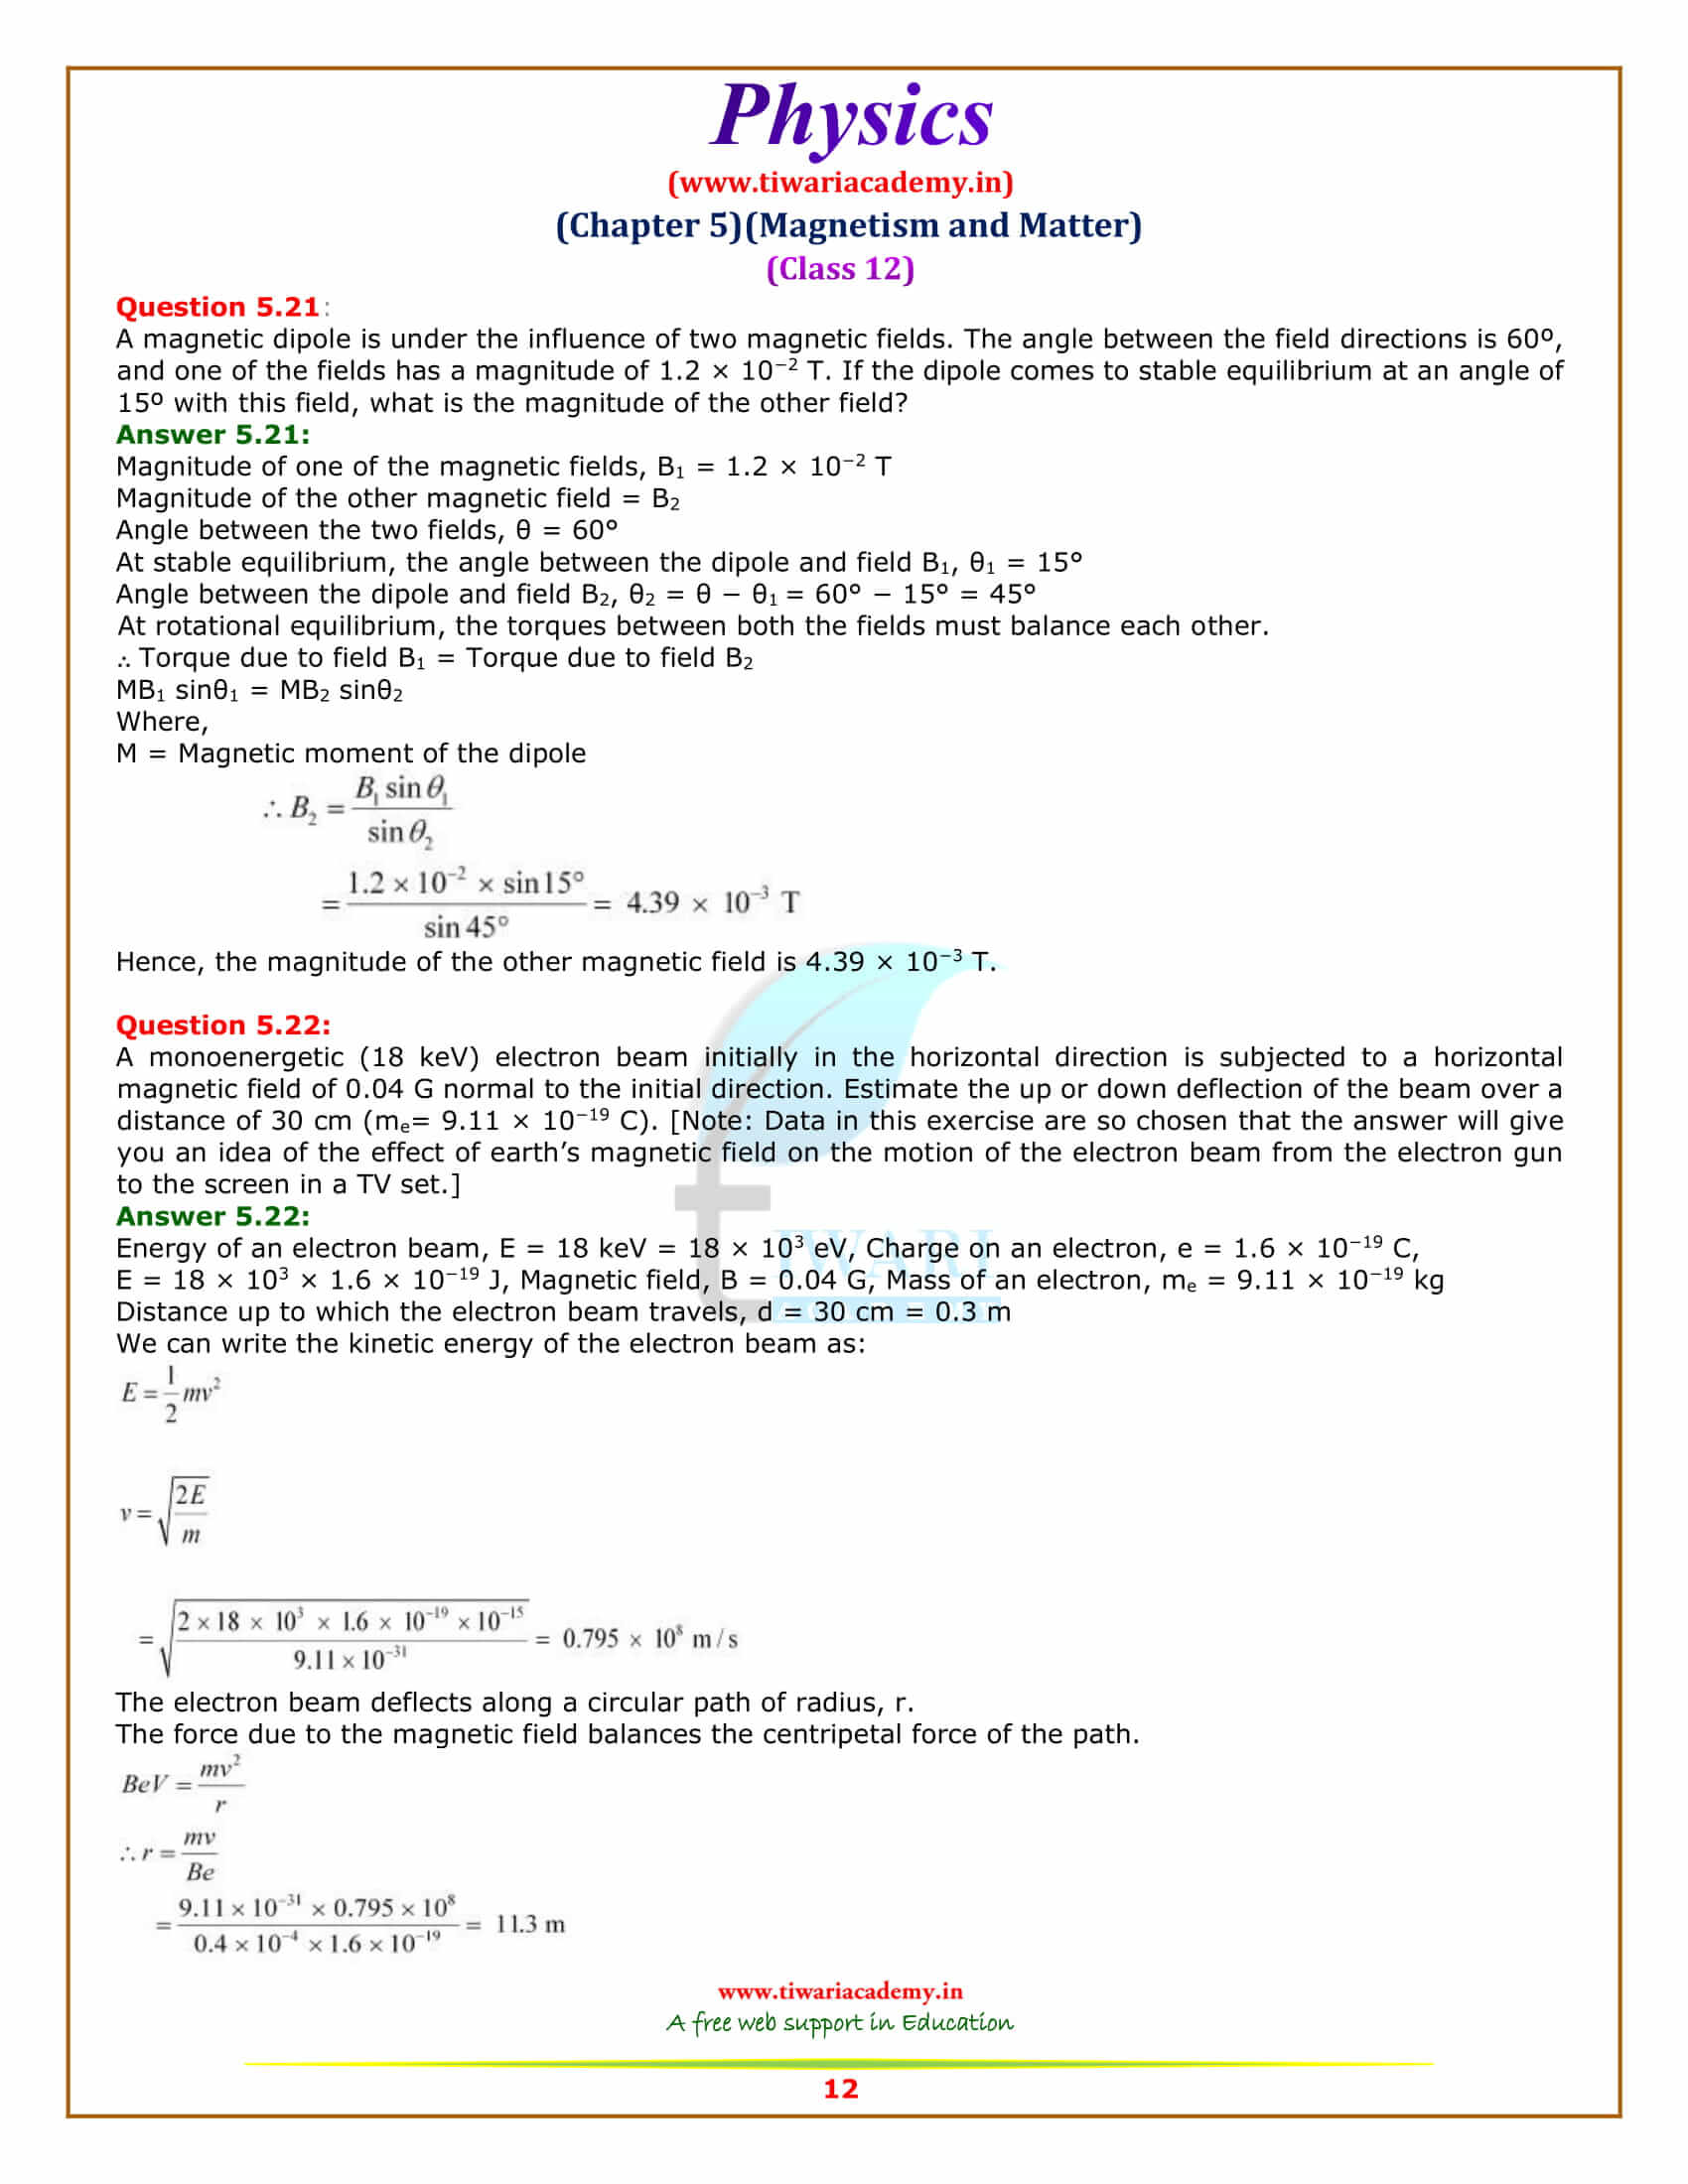 12 Physics Chapter 5 Magnetism and Matter additional exercises solutions in pdf